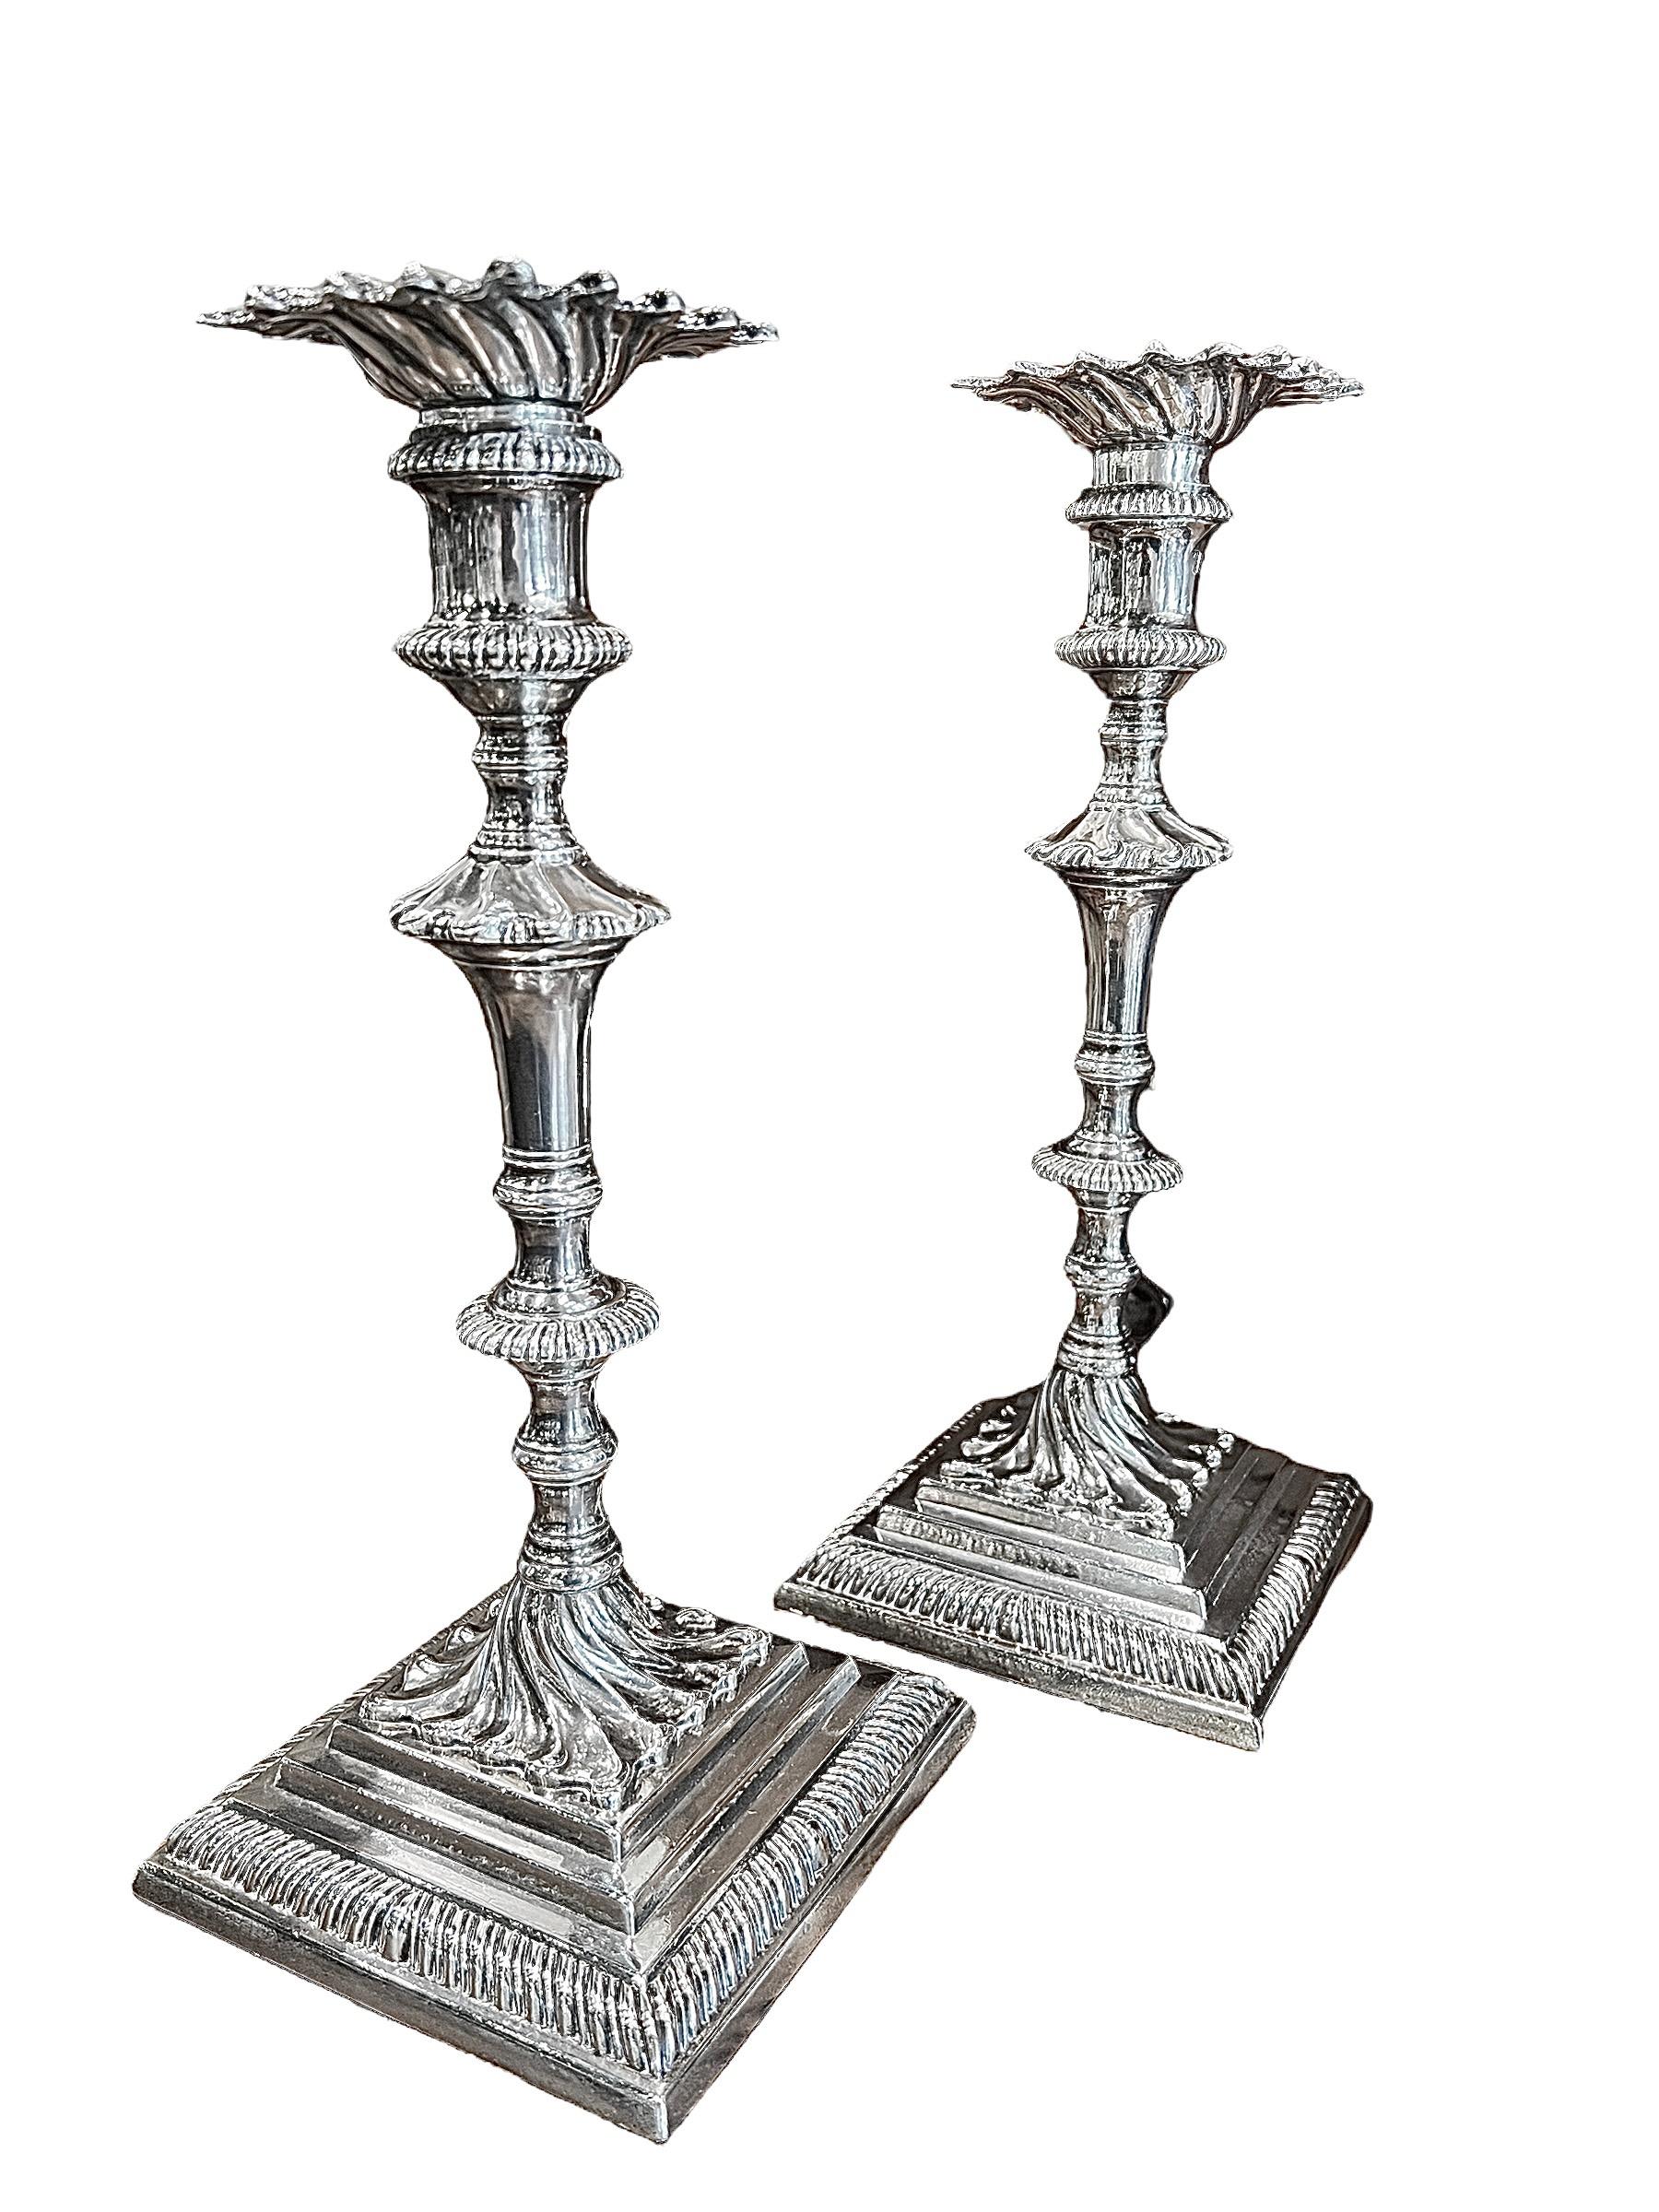 Hammered 1763 Pair of George III Sterling Silver Candlesticks by William Cafe, English